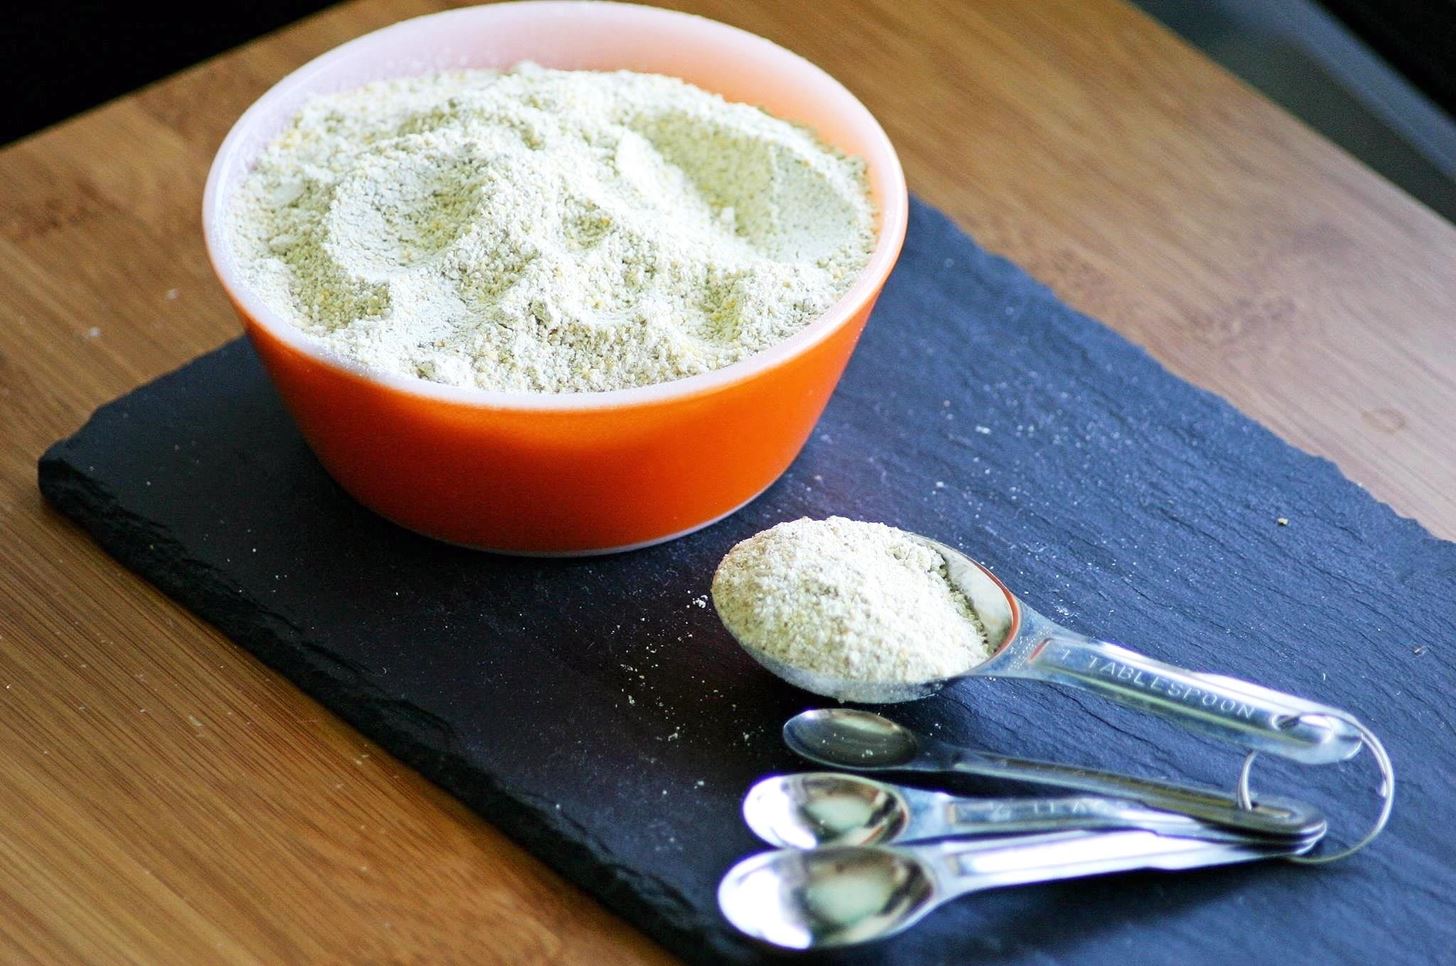 How & Why You Should Make Your Own Protein Powder